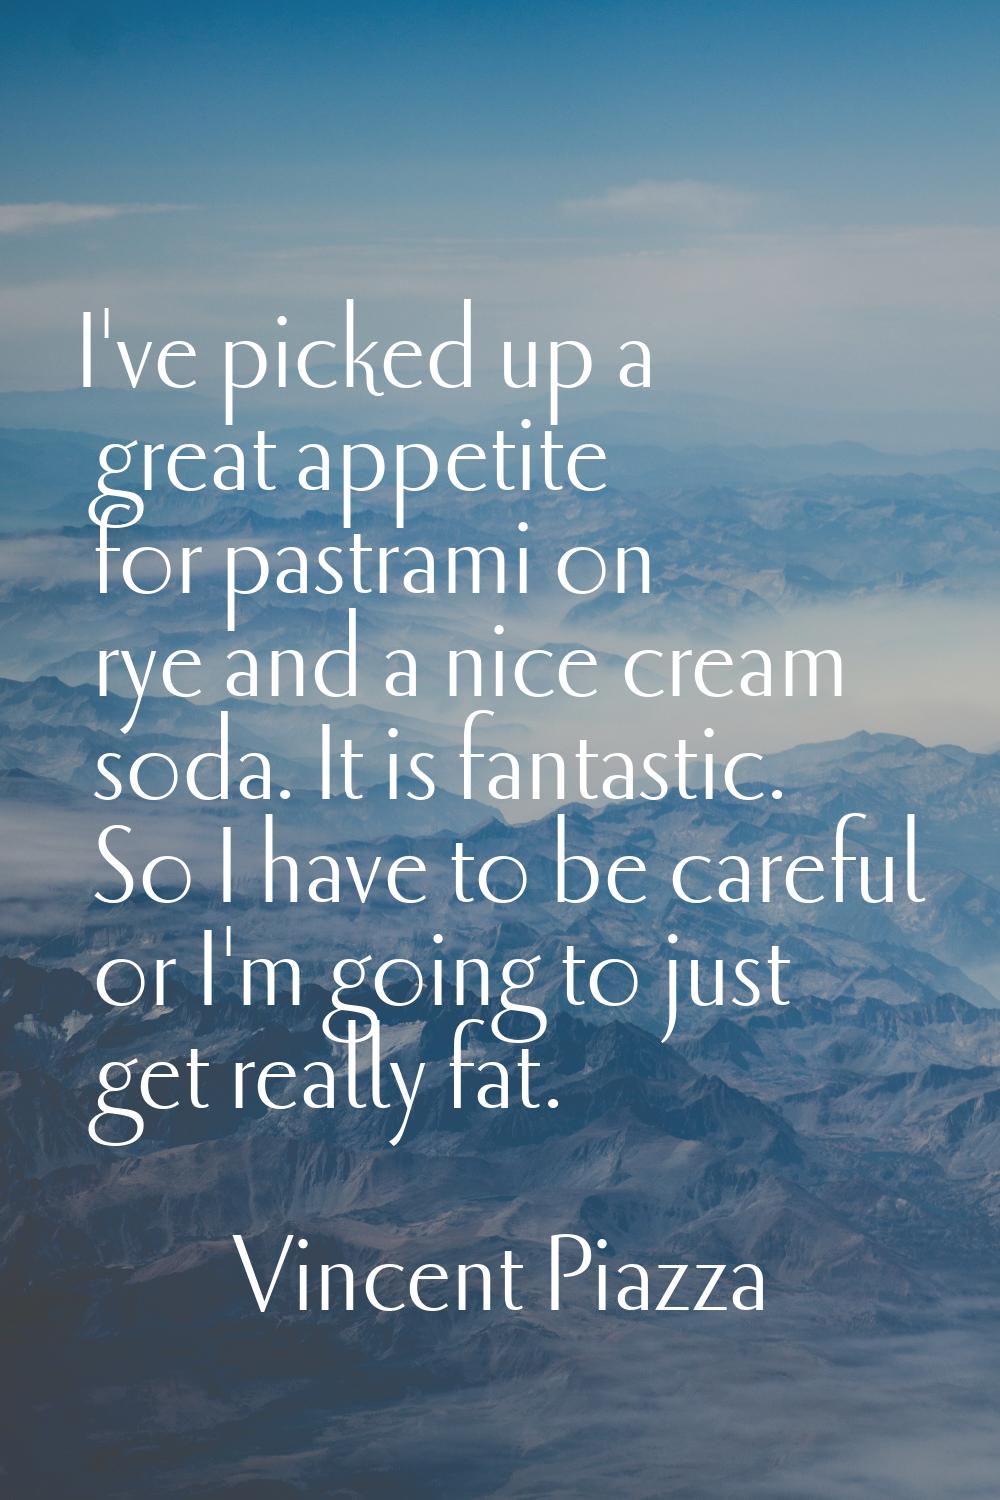 I've picked up a great appetite for pastrami on rye and a nice cream soda. It is fantastic. So I ha